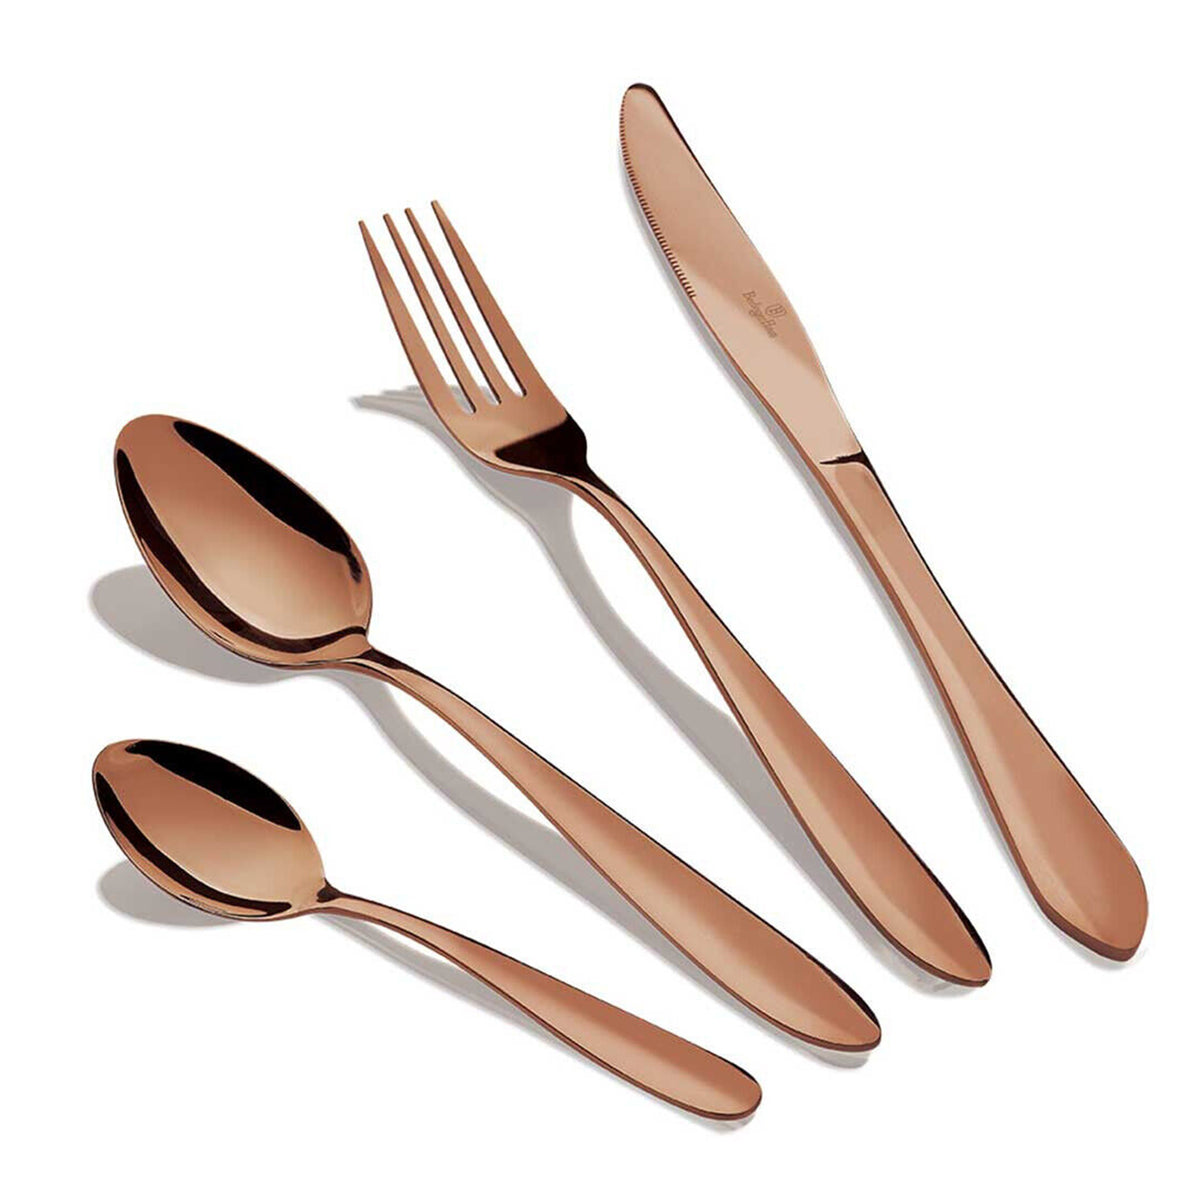 Stainless Steel Cutlery Set 24 Pcs Mirror Rose gold